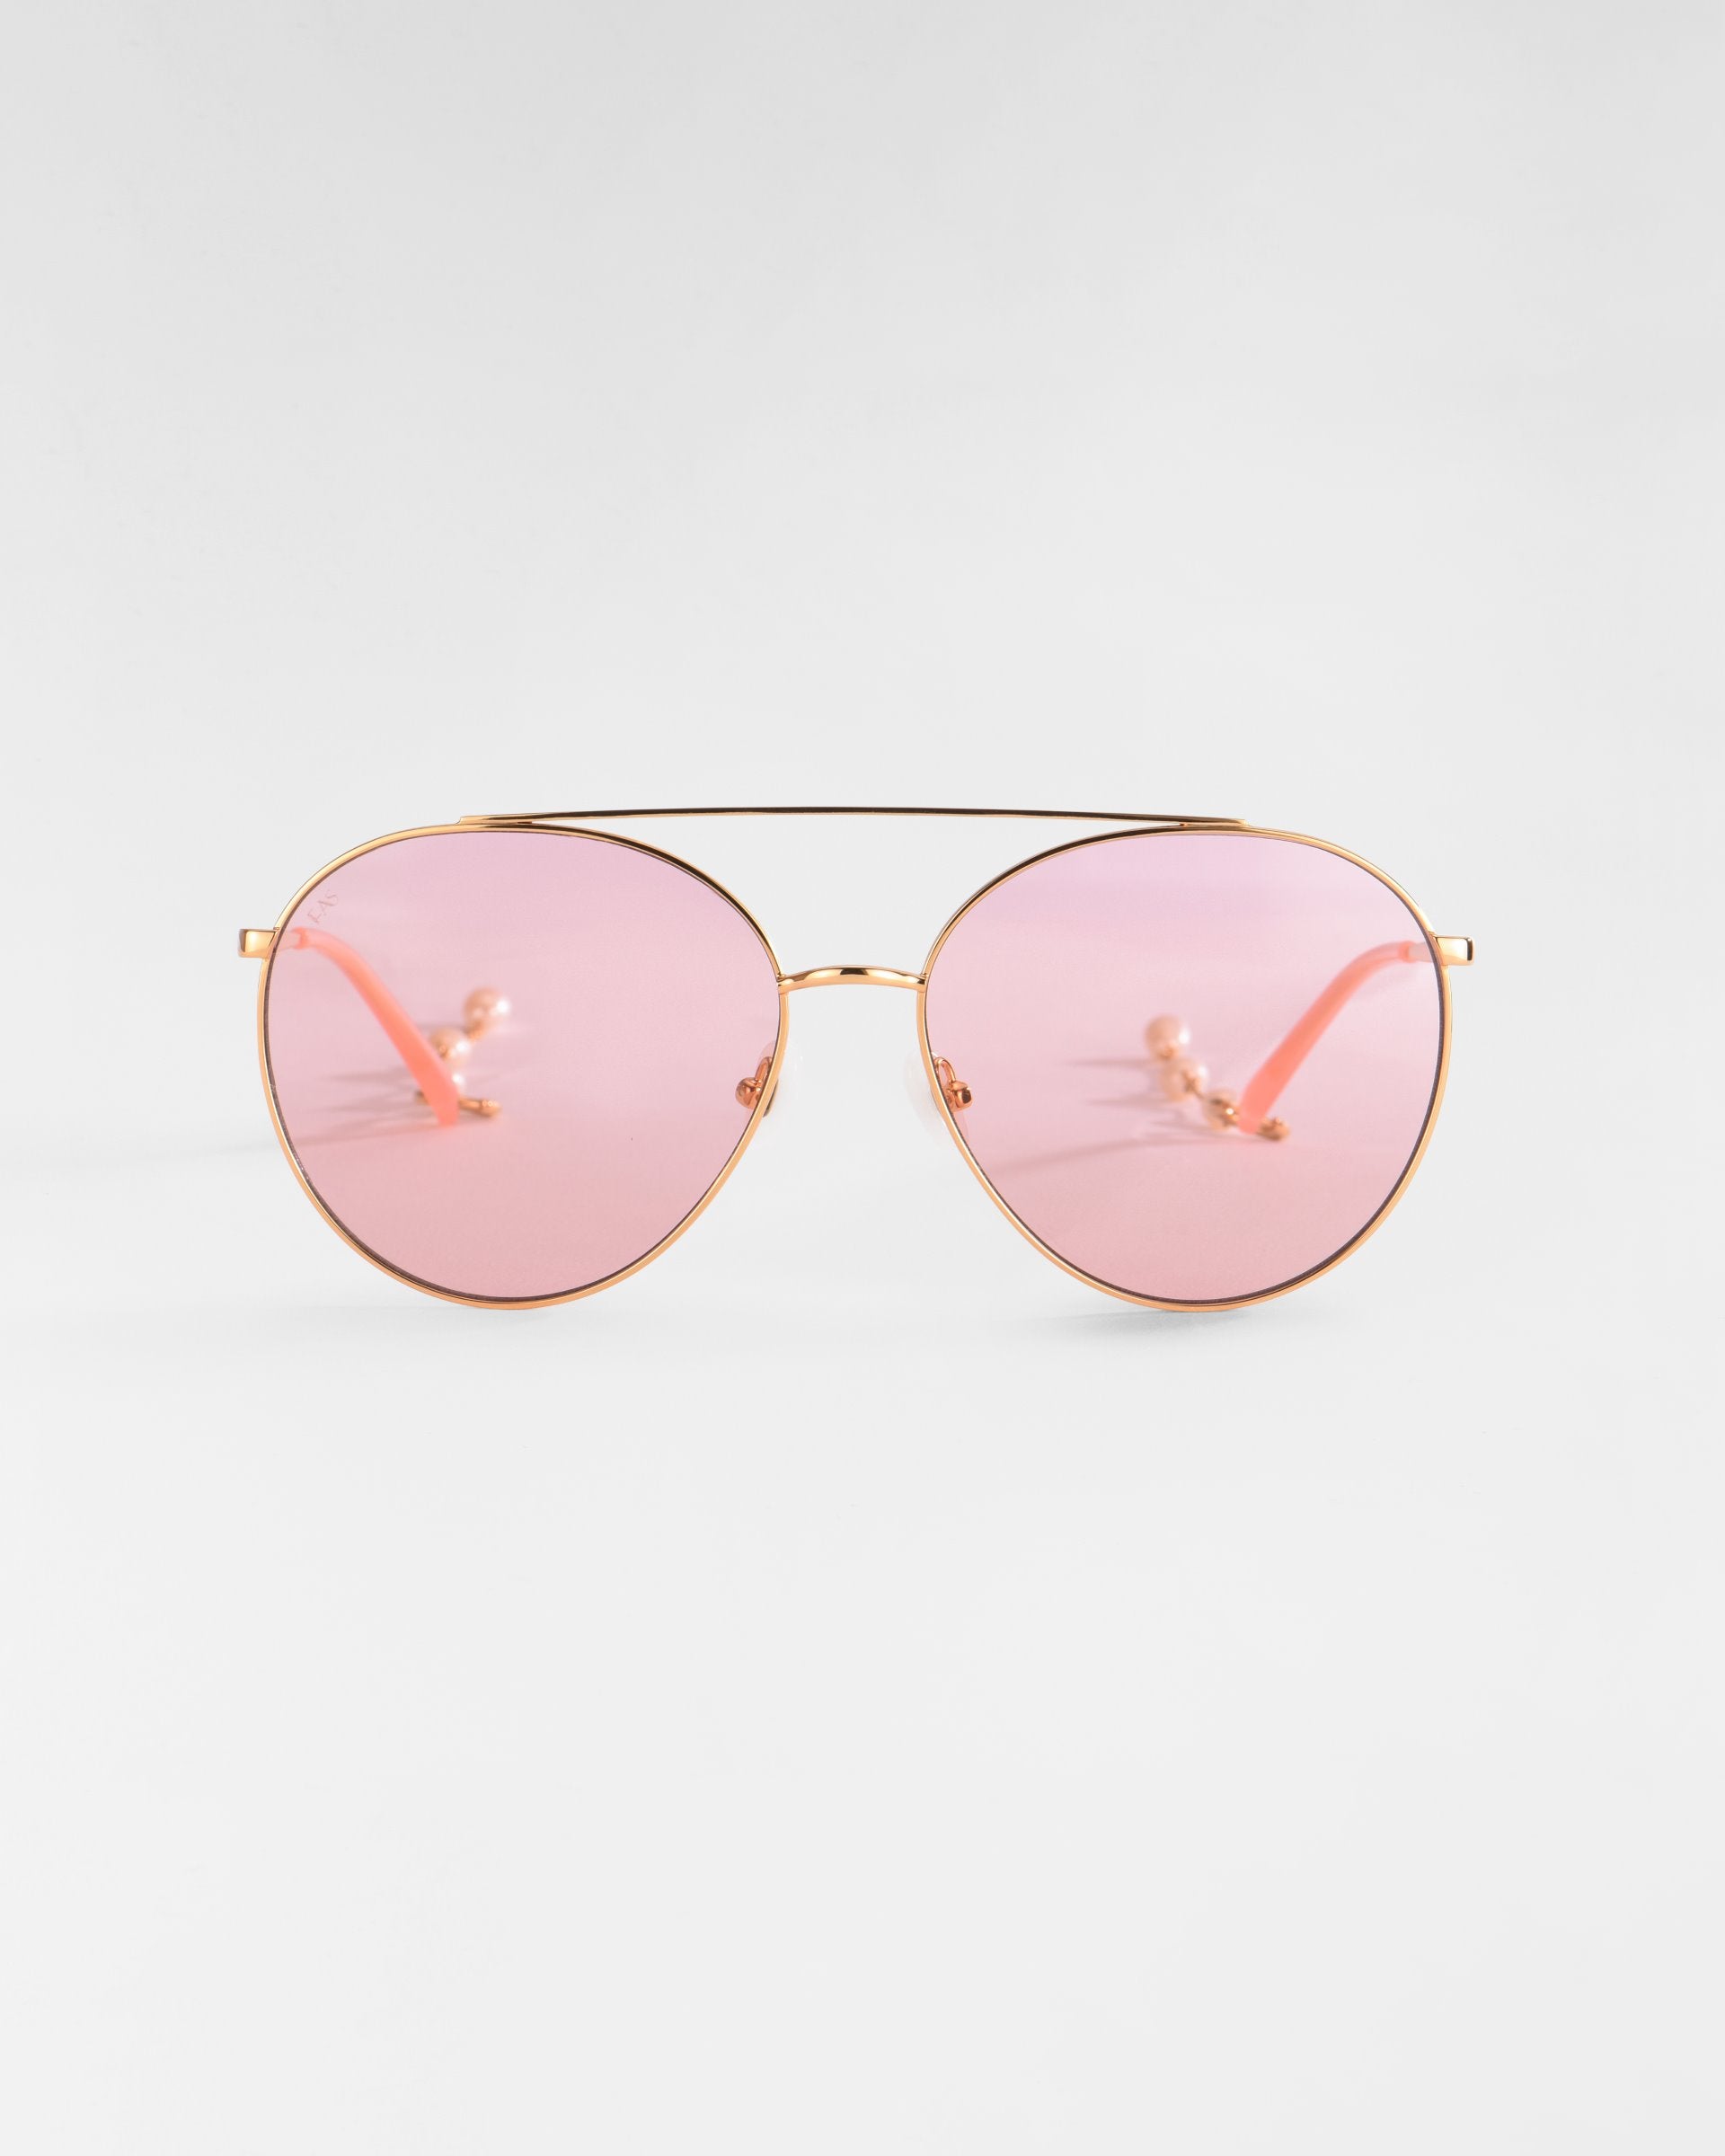 A pair of fashionable aviator sunglasses featuring 18k gold plating on the frame and light pink tinted lenses. The bridge and nose pads are also gold, with the stems extending to slender, light pink ear pieces. The background is a plain, neutral gray. This is the Yoyo by For Art&#39;s Sake®.